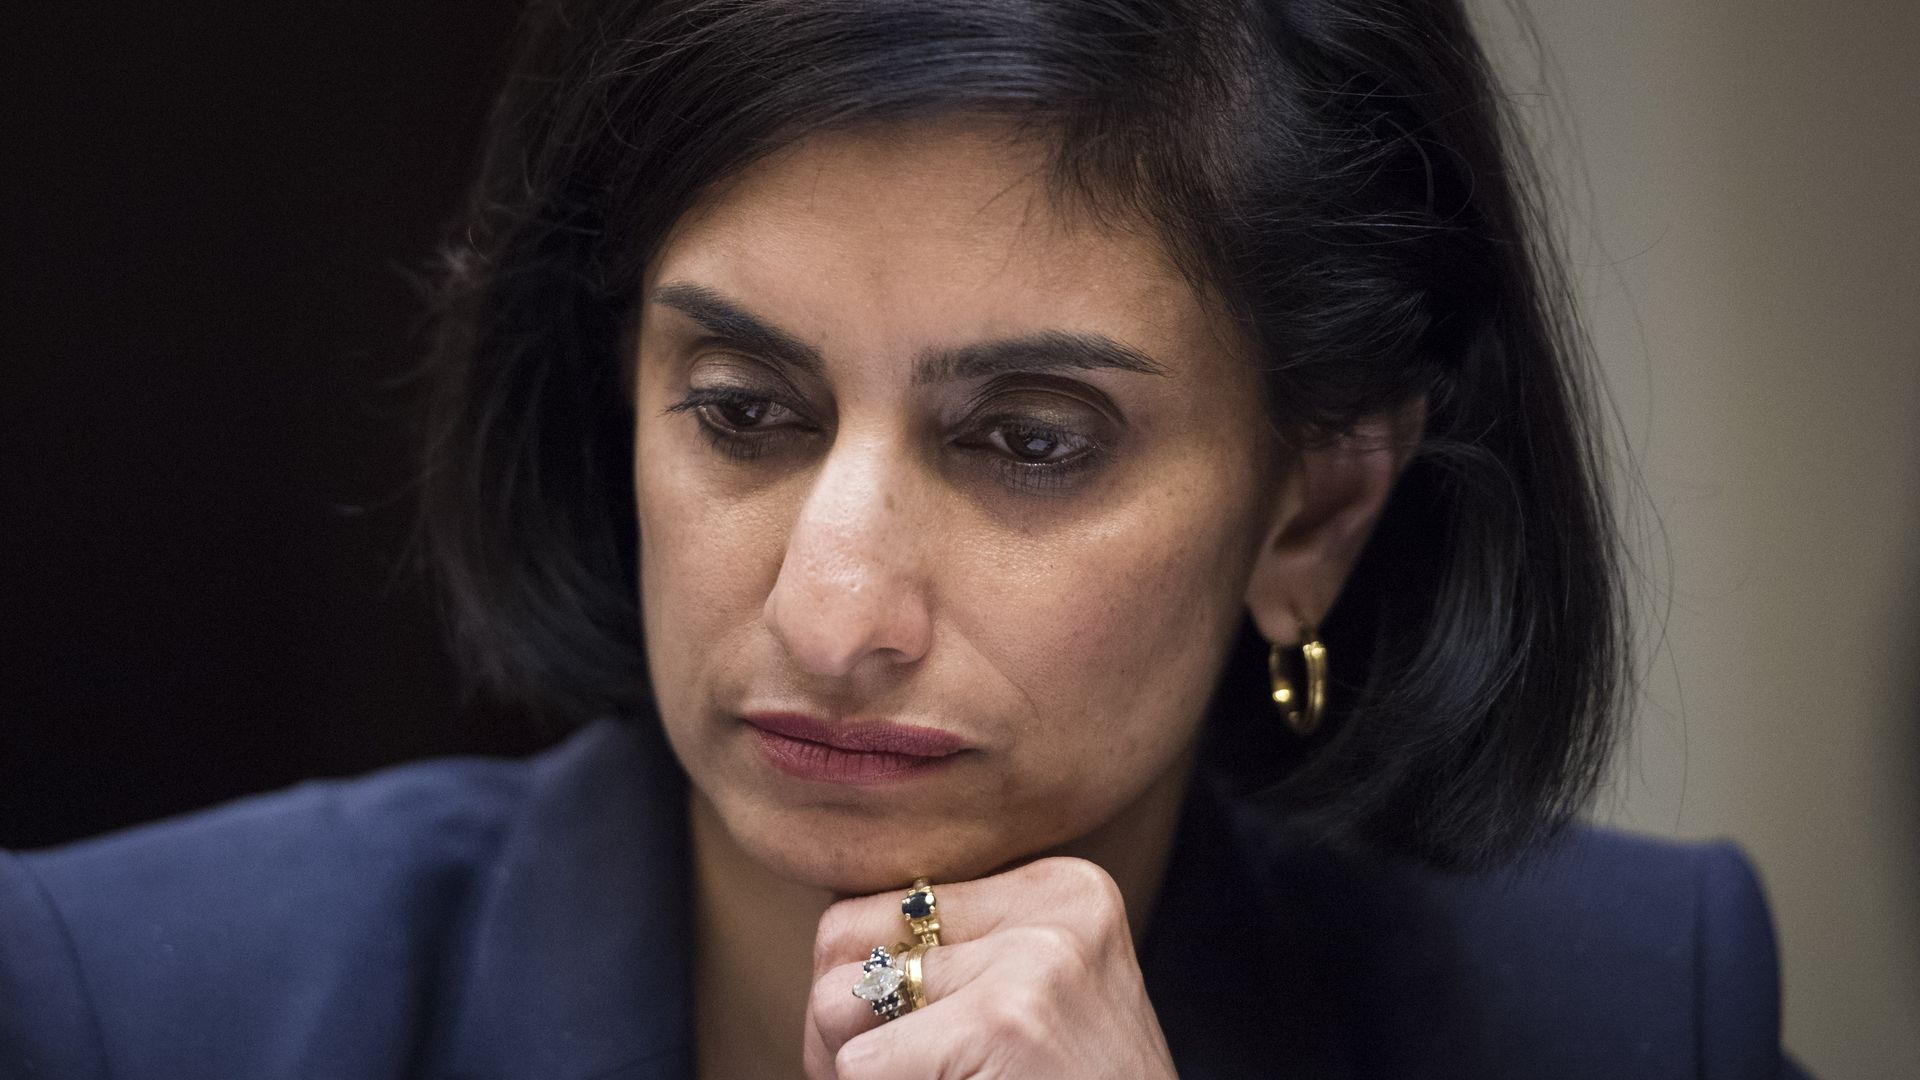 Centers for Medicare & Medicaid Services Administrator Seema Verma